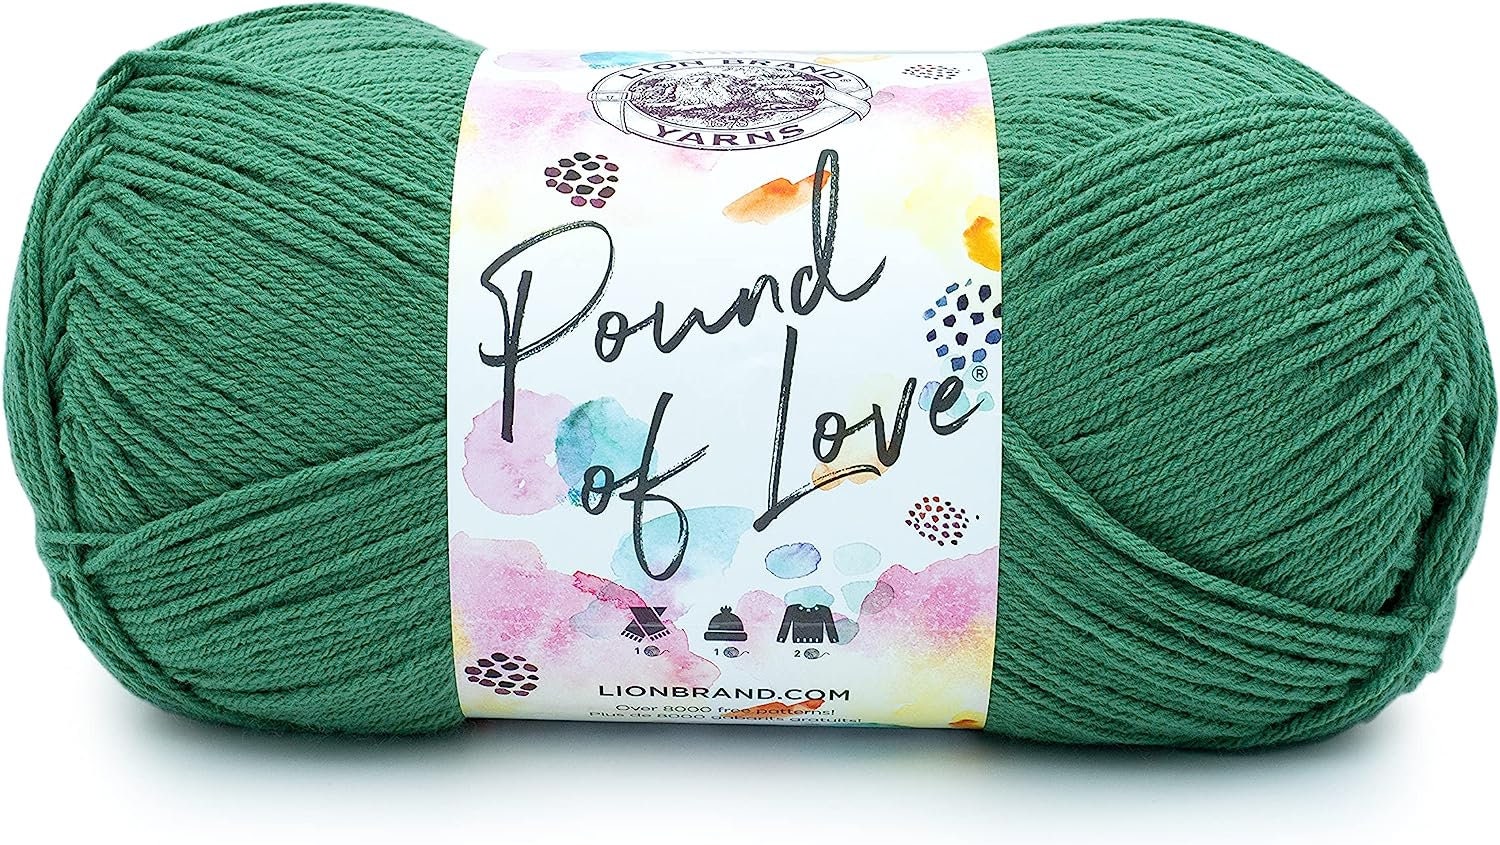 Lion Brand Pound Of Love Yarn Review - Crochet Hat Pattern Review